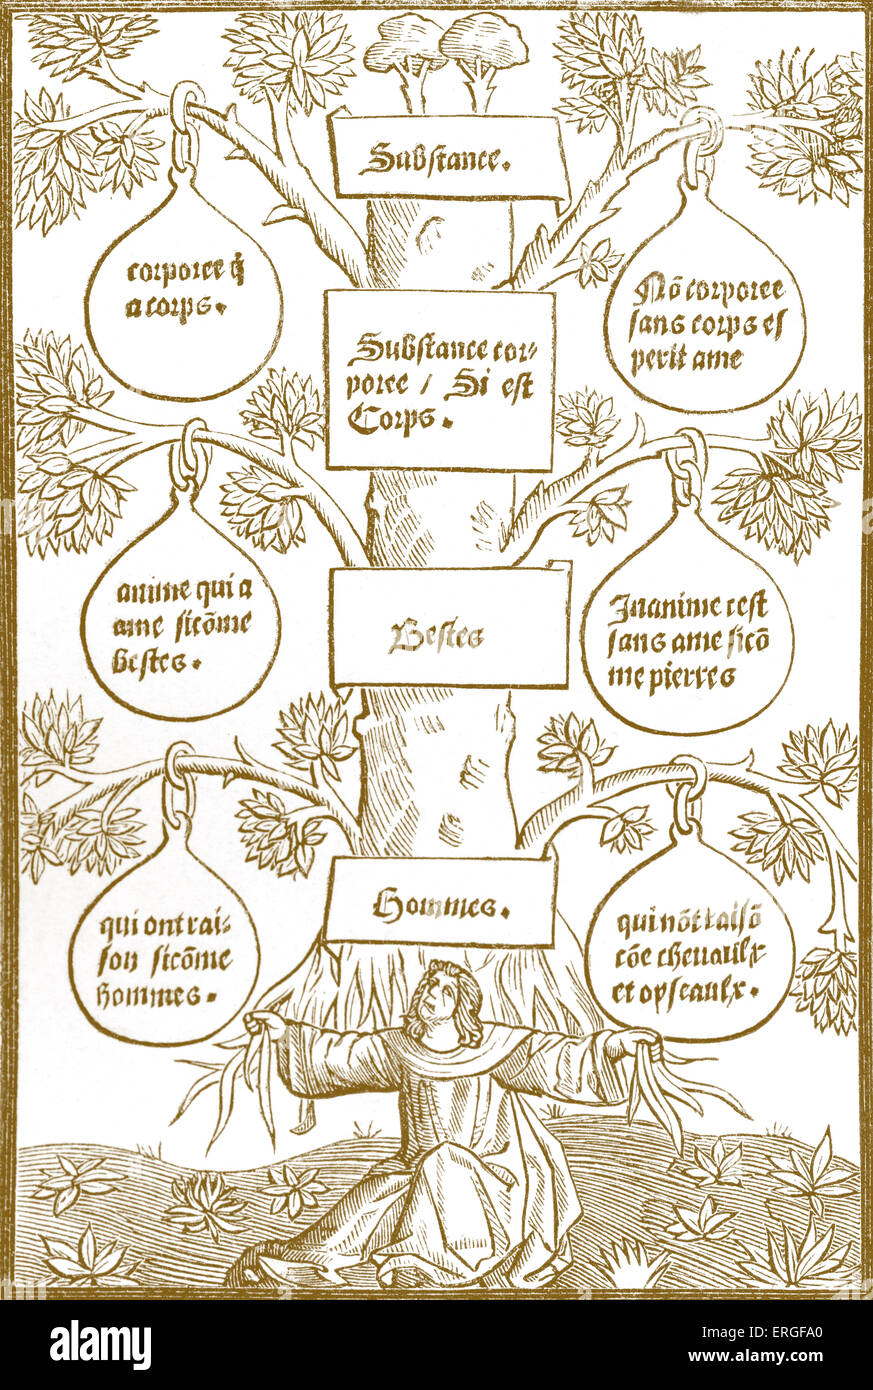 'Tree of Beings and Substances' - reproduction of  wood engraving of the 'Cuer de Philosophy'. Printed at Paris for Jehan de la Stock Photo